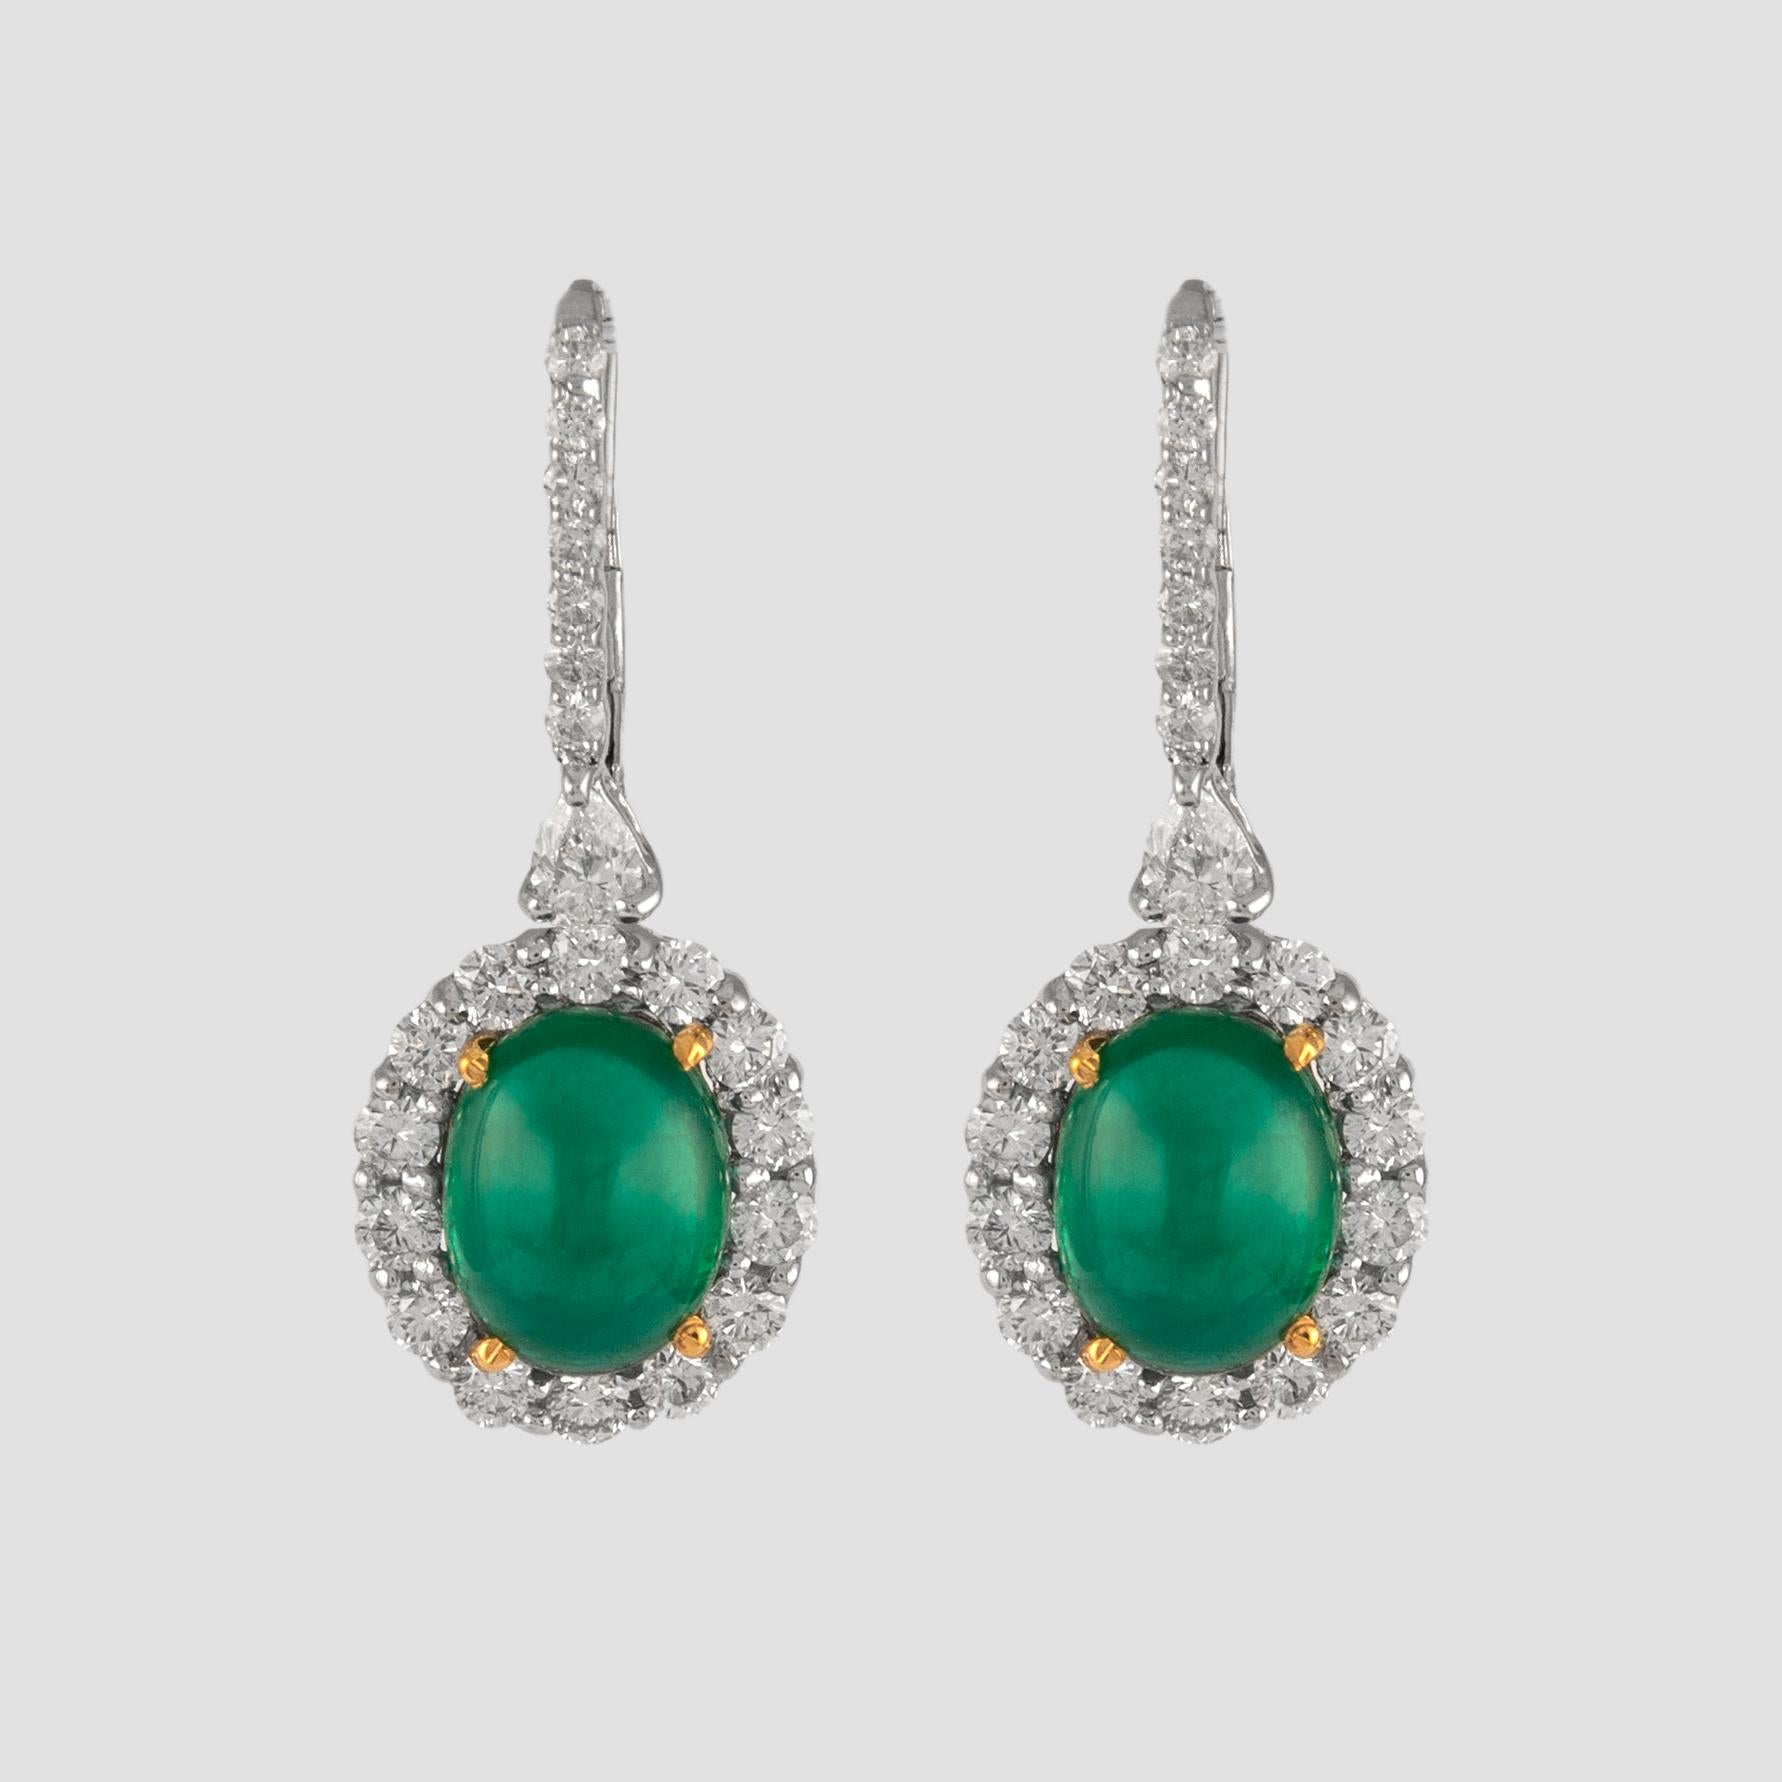 Sensational emerald and diamond drop earrings. Created by Alexander of Beverly Hills.
2 cabochon emeralds, 8.45 carats total. Complimented by 2 pear shape and 42 brilliant diamonds, 2.45 carats. Approximately H/I color and SI clarity. 18k white